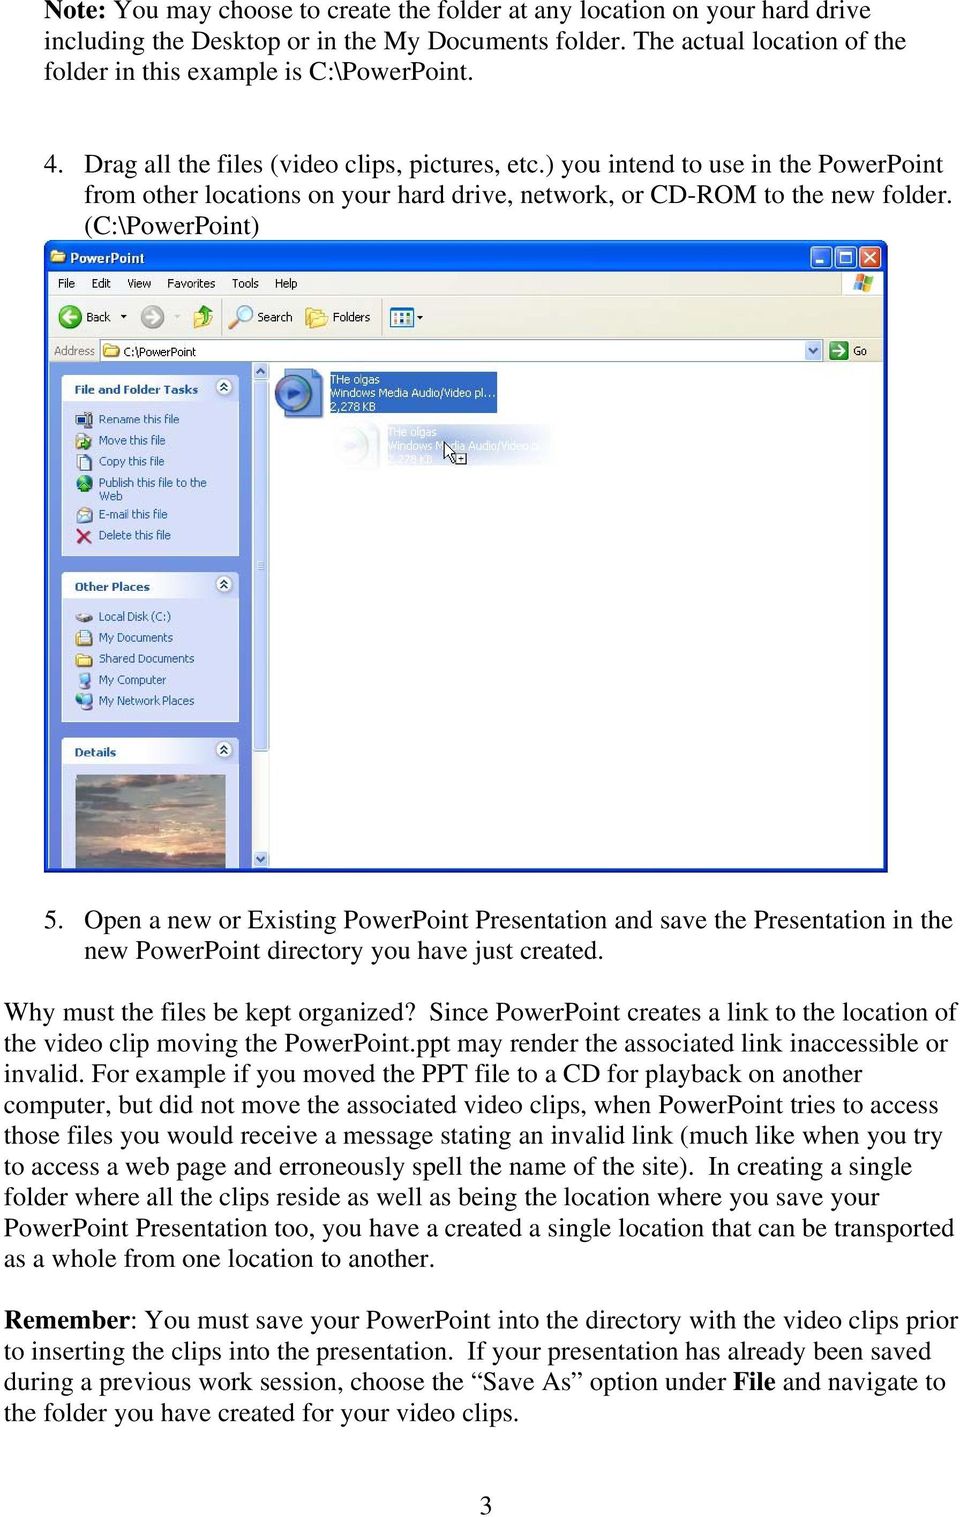 Open a new or Existing PowerPoint Presentation and save the Presentation in the new PowerPoint directory you have just created. Why must the files be kept organized?